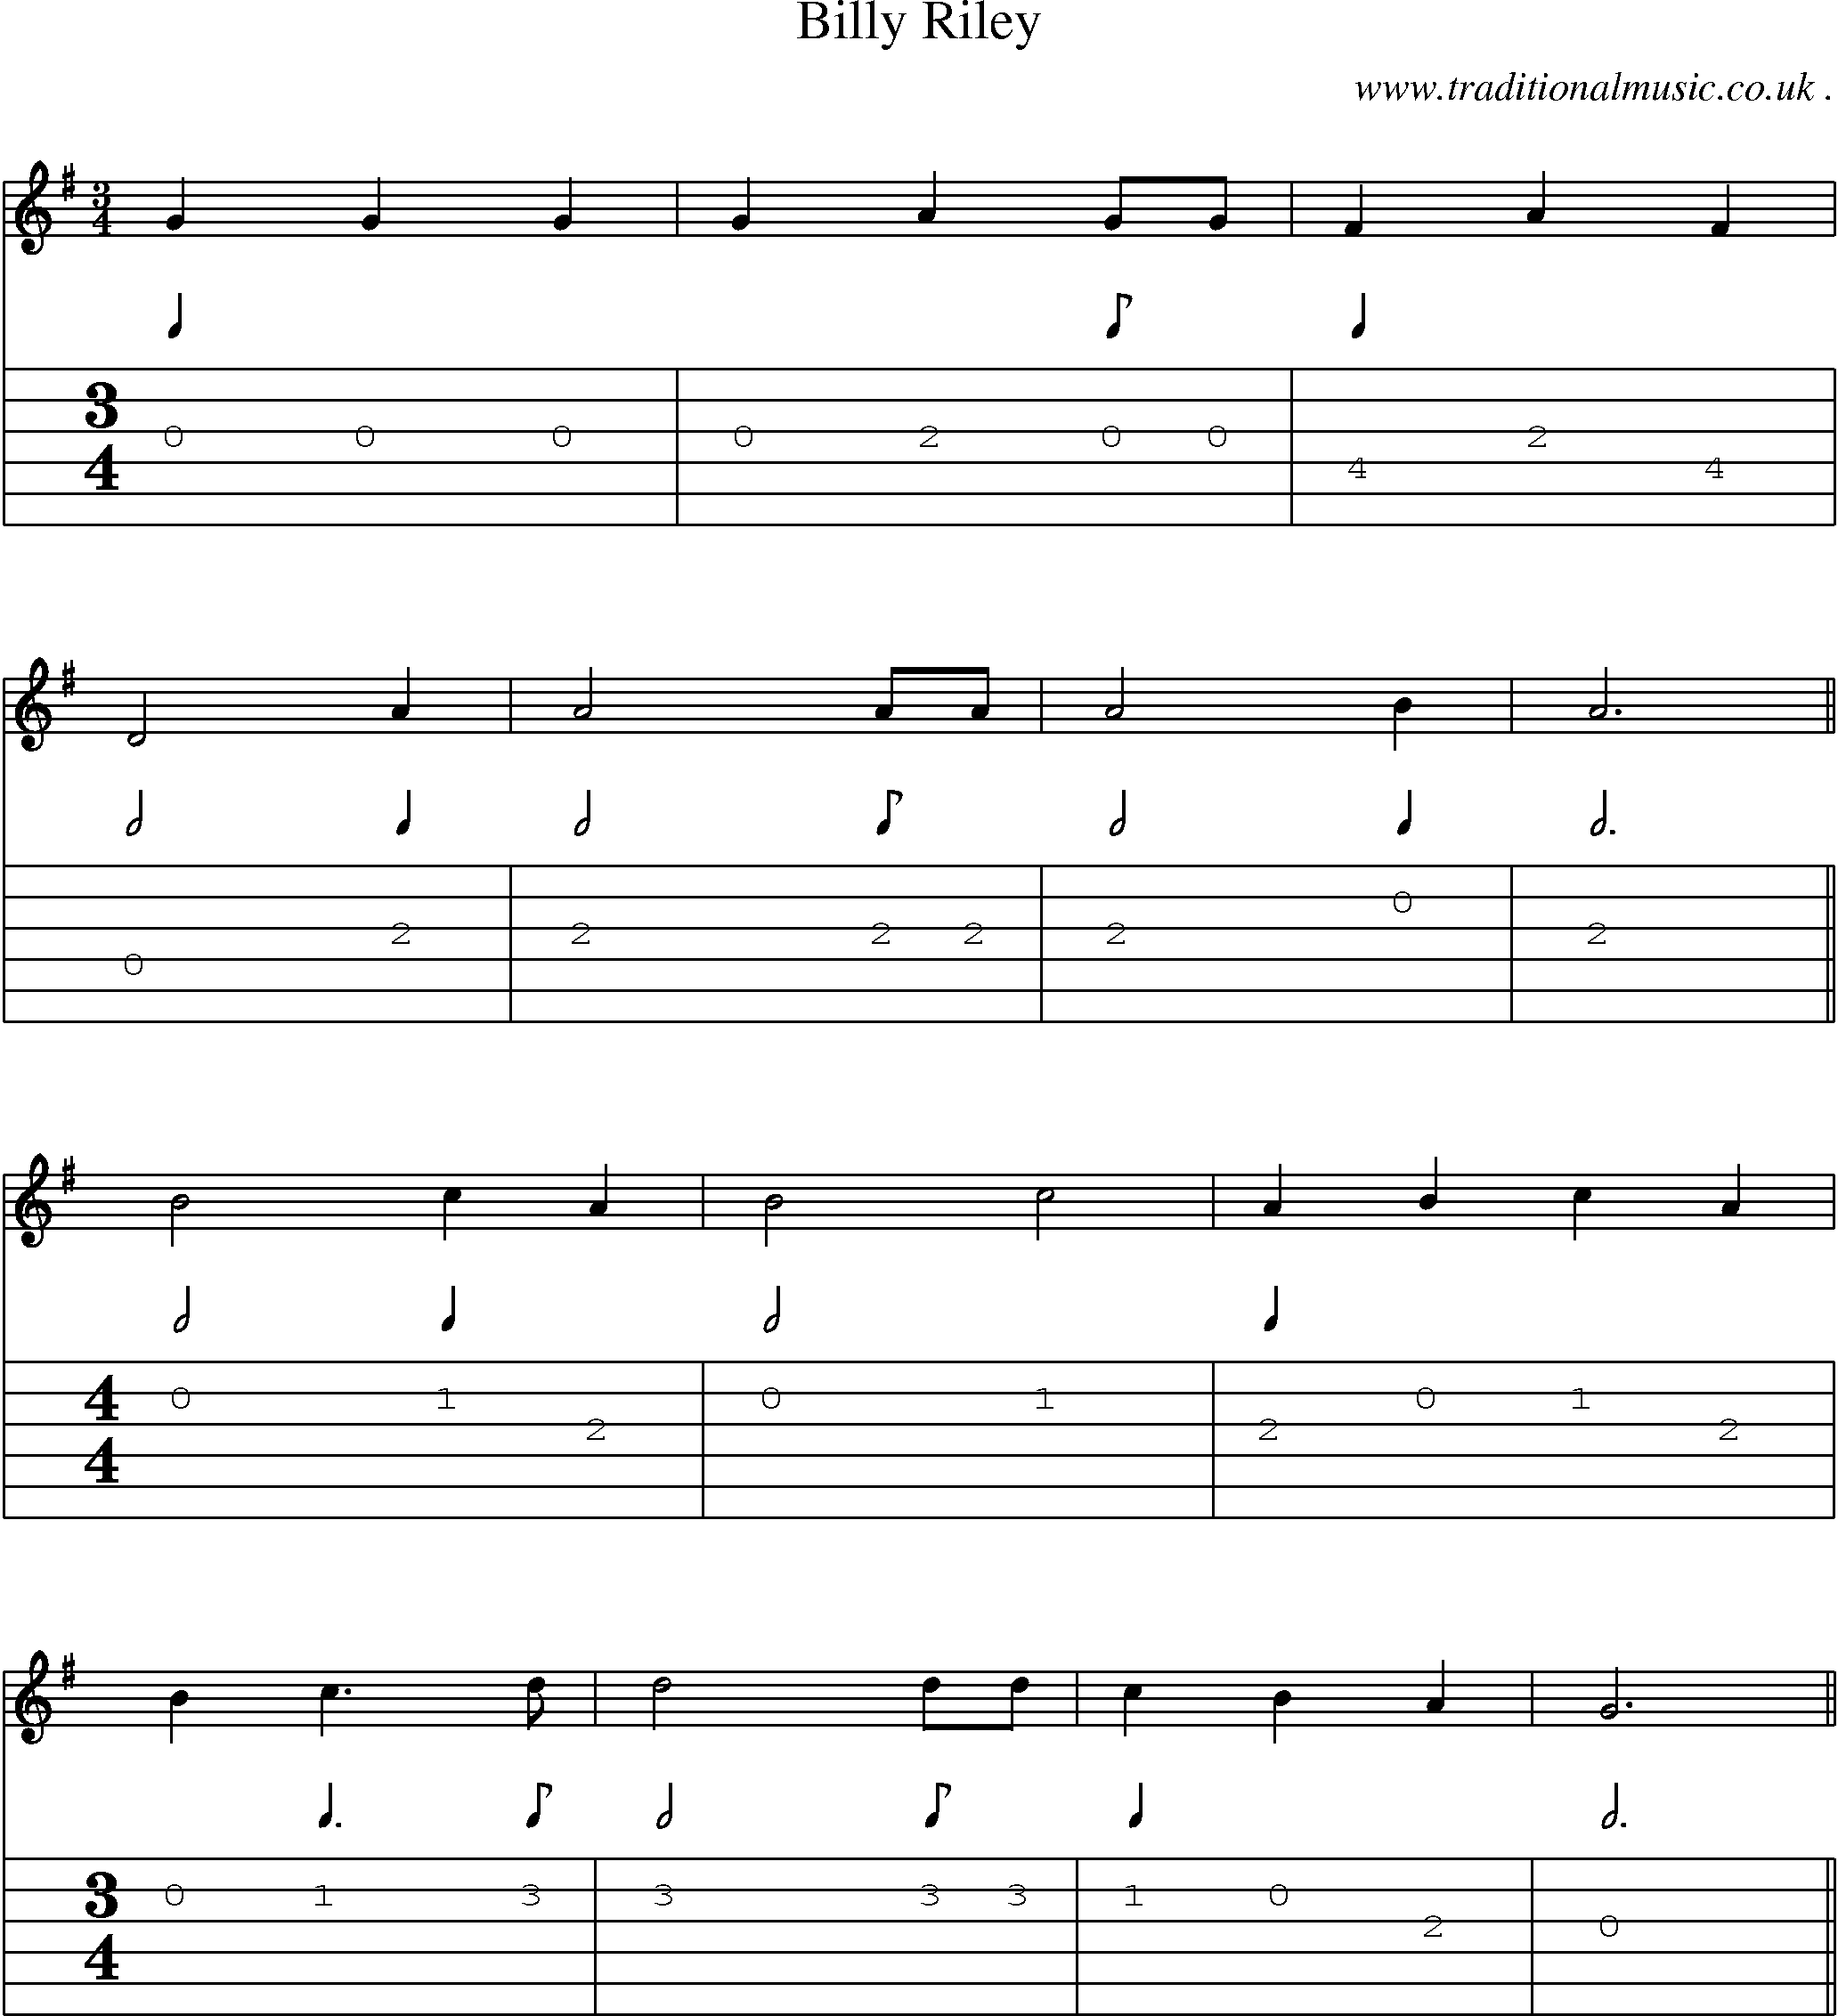 Sheet-Music and Guitar Tabs for Billy Riley